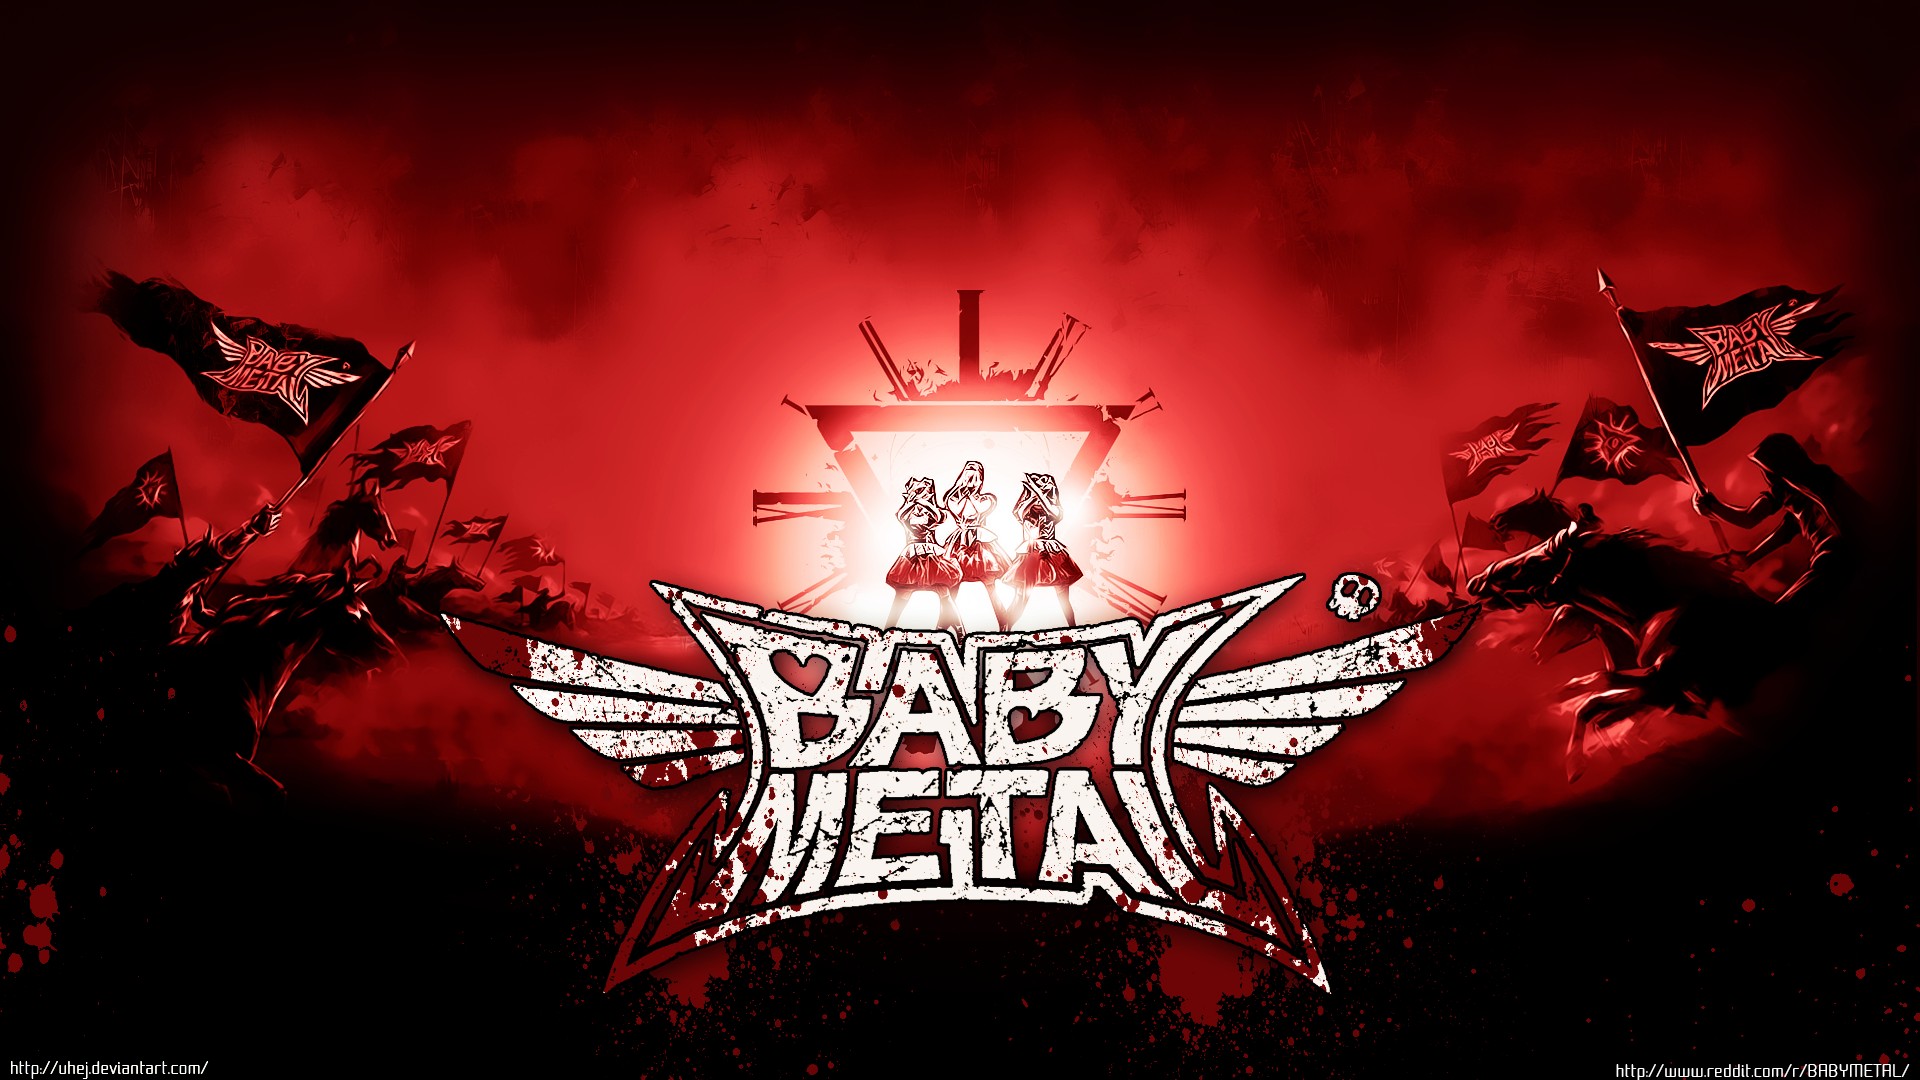 Babymetal Wallpaper Download Free Amazing Hd Wallpapers For Desktop Computers And Smartphones In Any Resolution Desktop Android Iphone Ipad 19x1080 1366x768 360x640 1024x768 Etc Wallpapertag